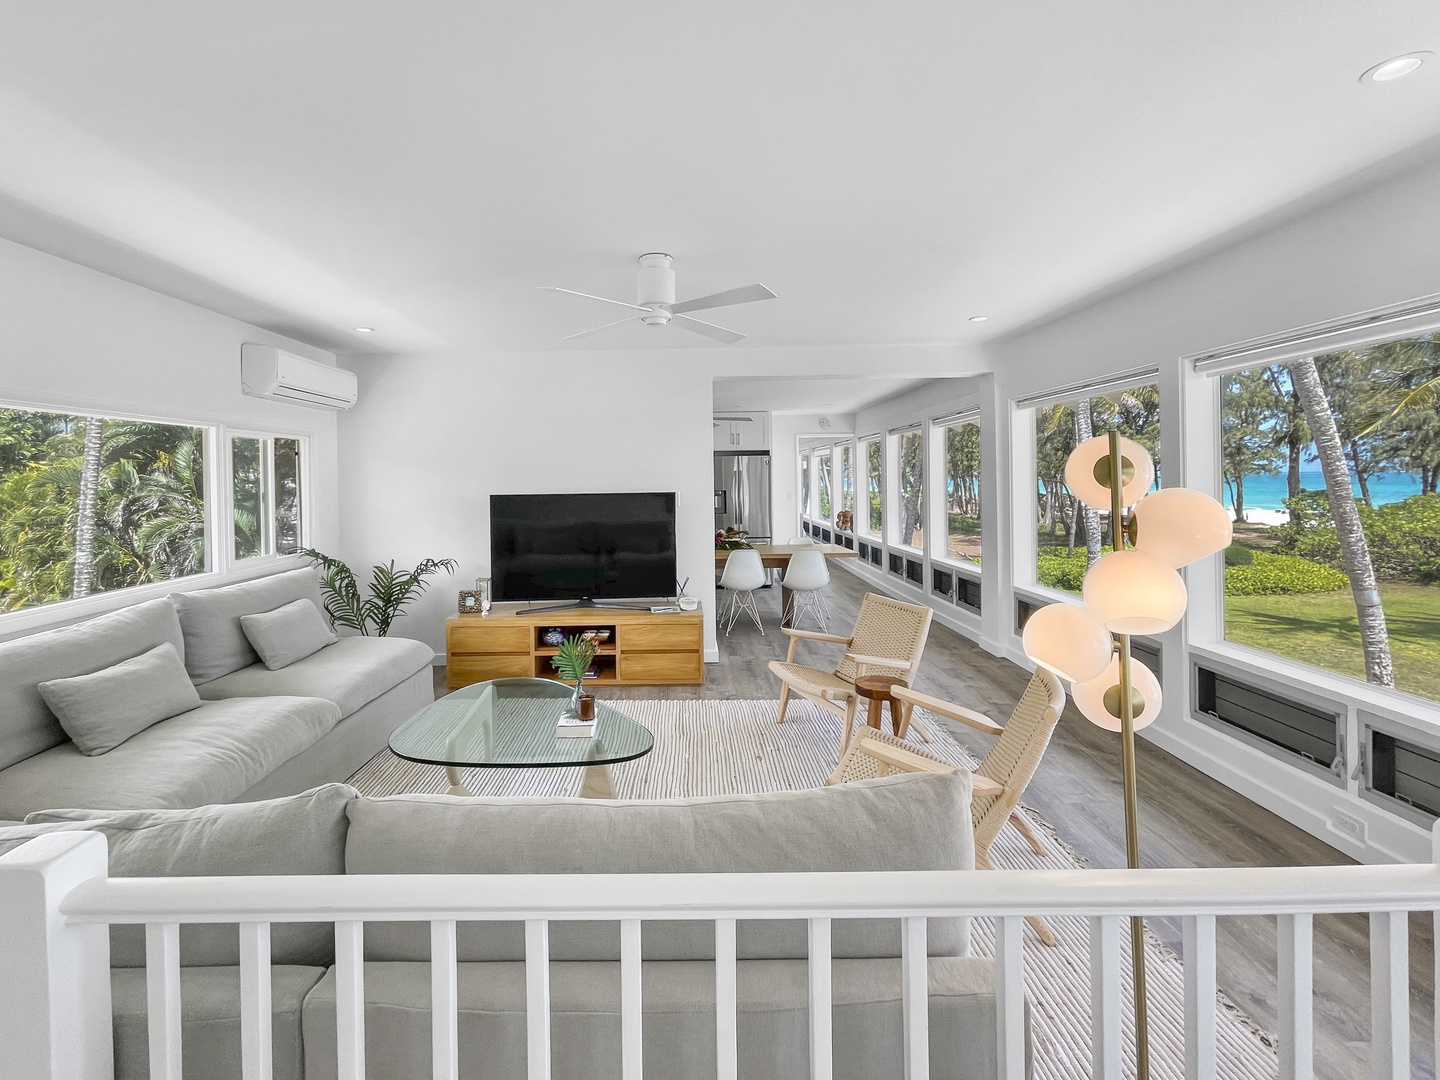 Waimanalo Vacation Rentals, Hale Waimanalo - The oversized gray sectional and woven accent chairs in the living room are positioned in front of a large flatscreen TV, but the real show is happening outside the expansive windows, where you have unobstructed beach and ocean views